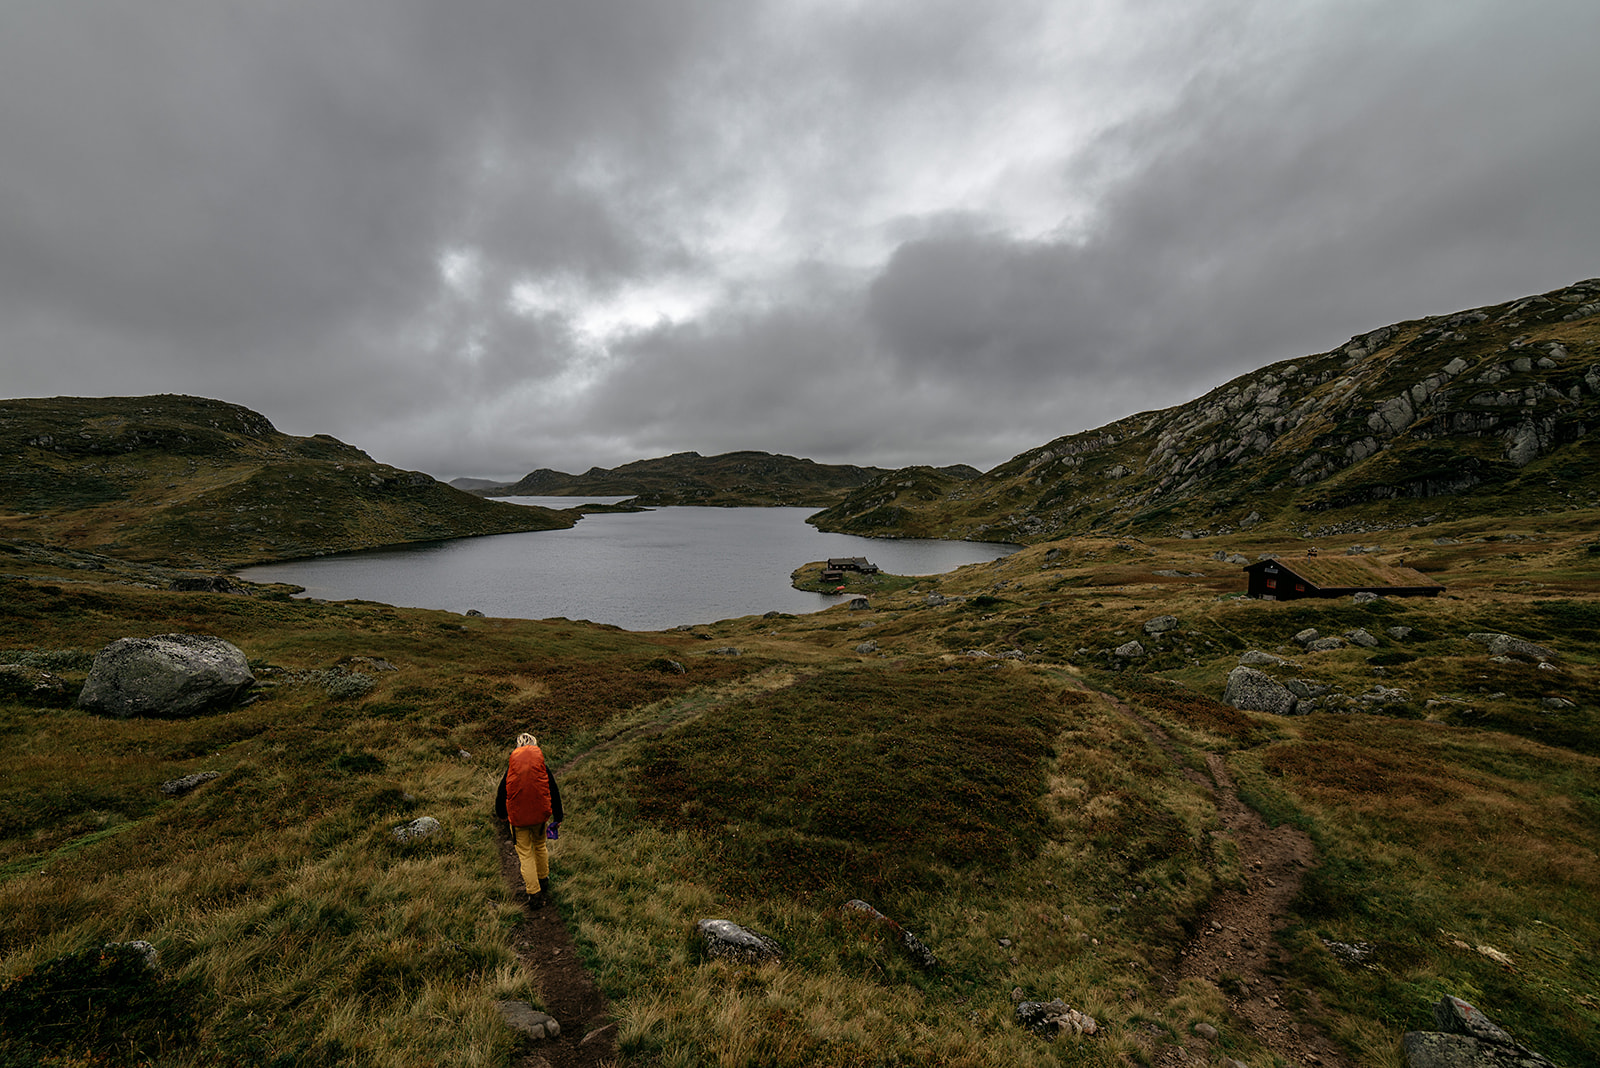 Hiker approaching small cabin at a mountain lake